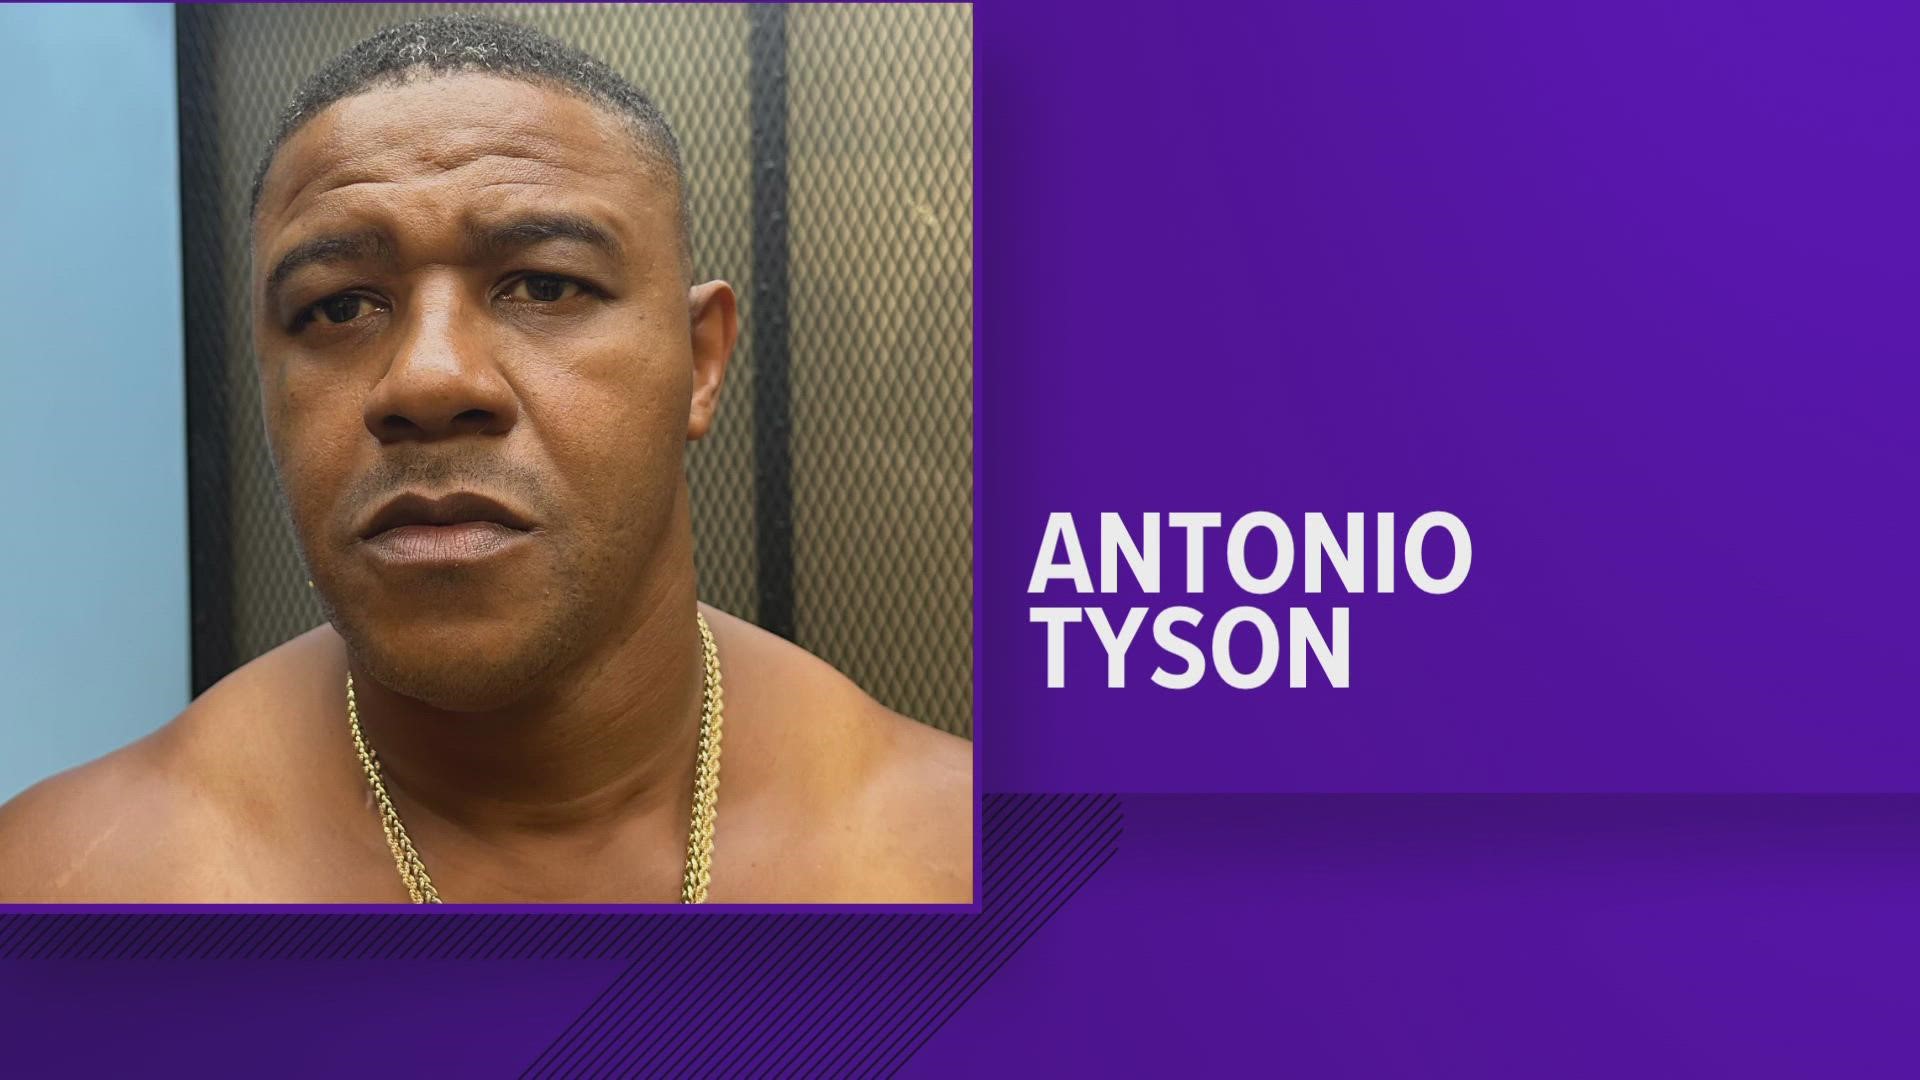 Antonio Tyson was transferred to Angola after attempting to escape the St. Tammany Parish Jail.